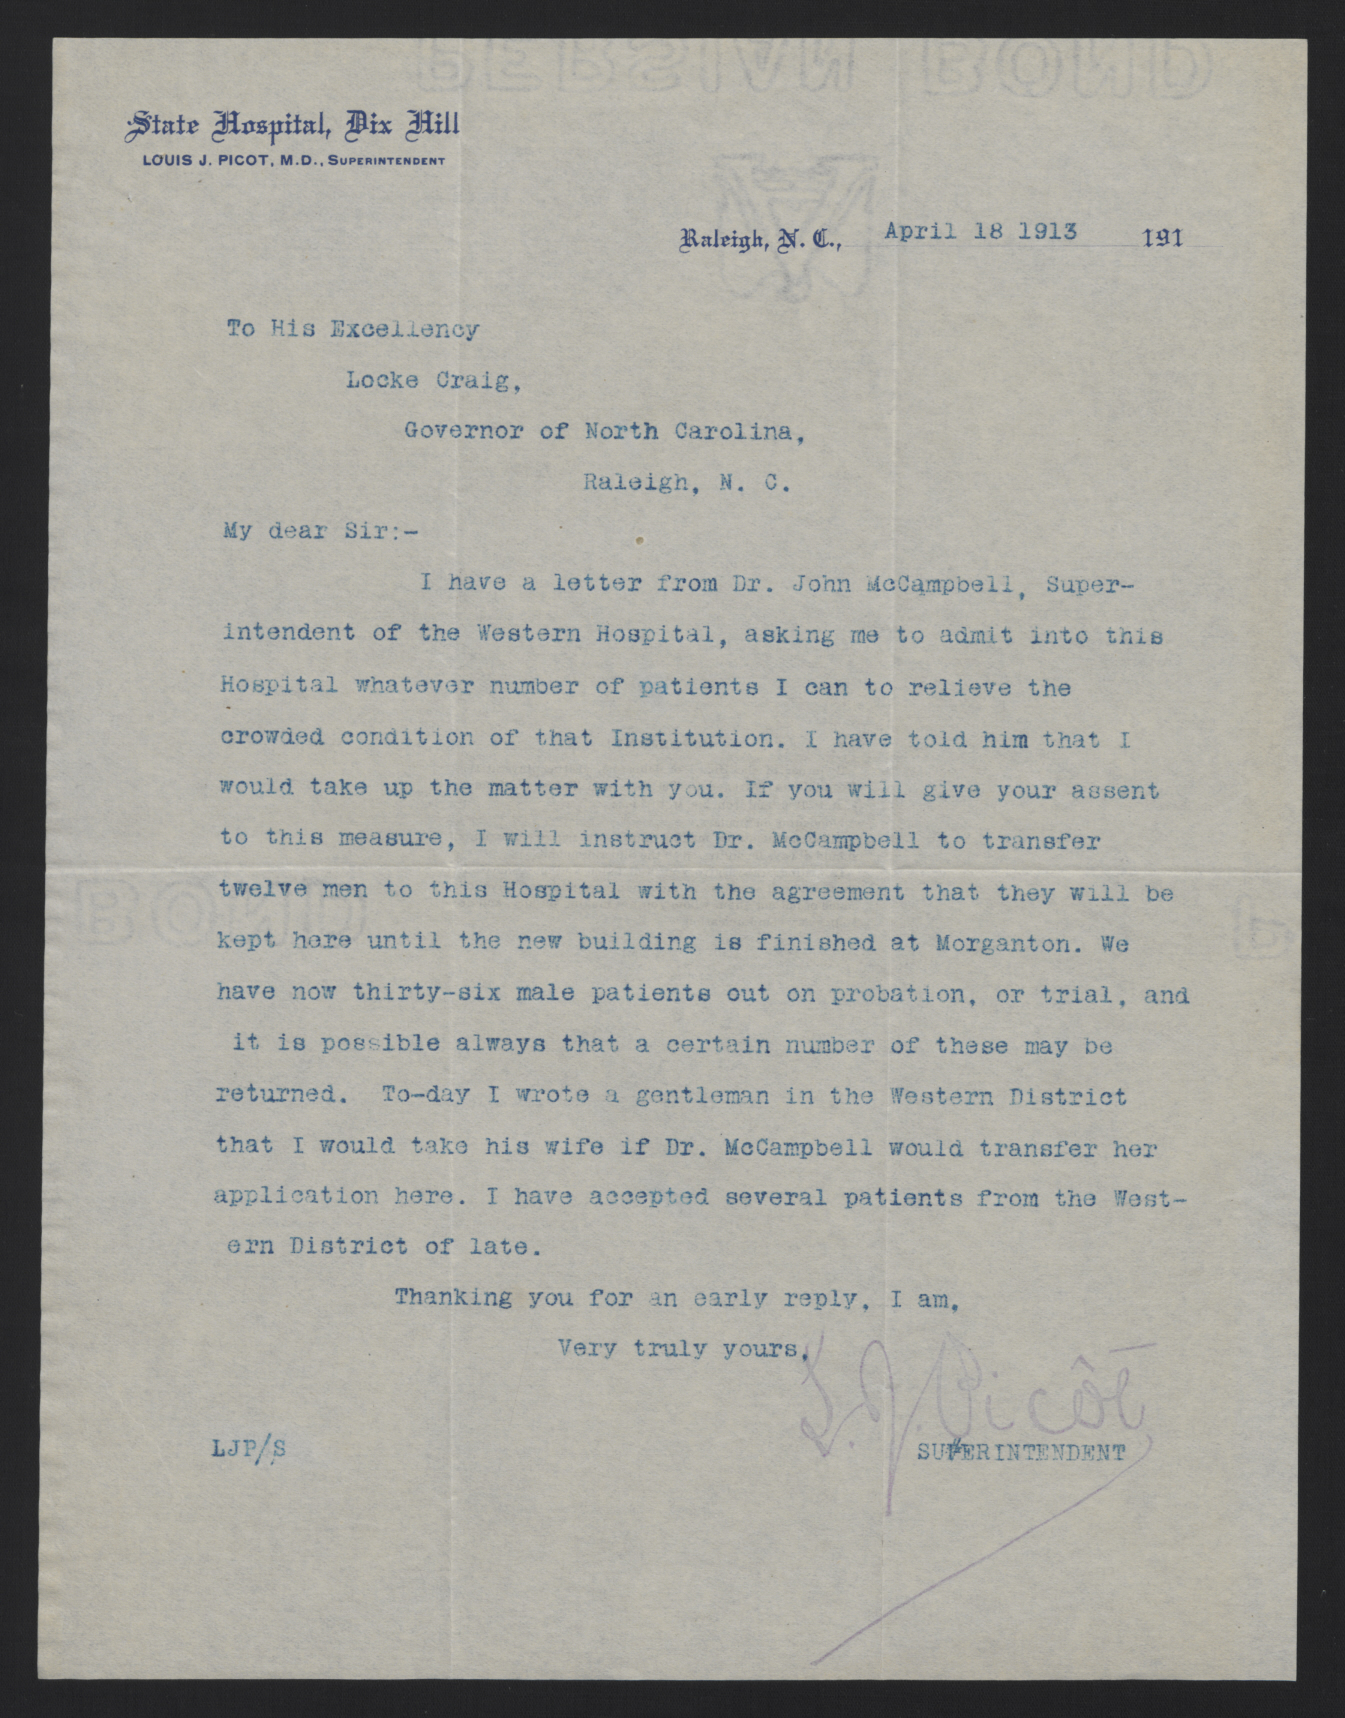 Letter from Picot to Craig, April 18, 1913